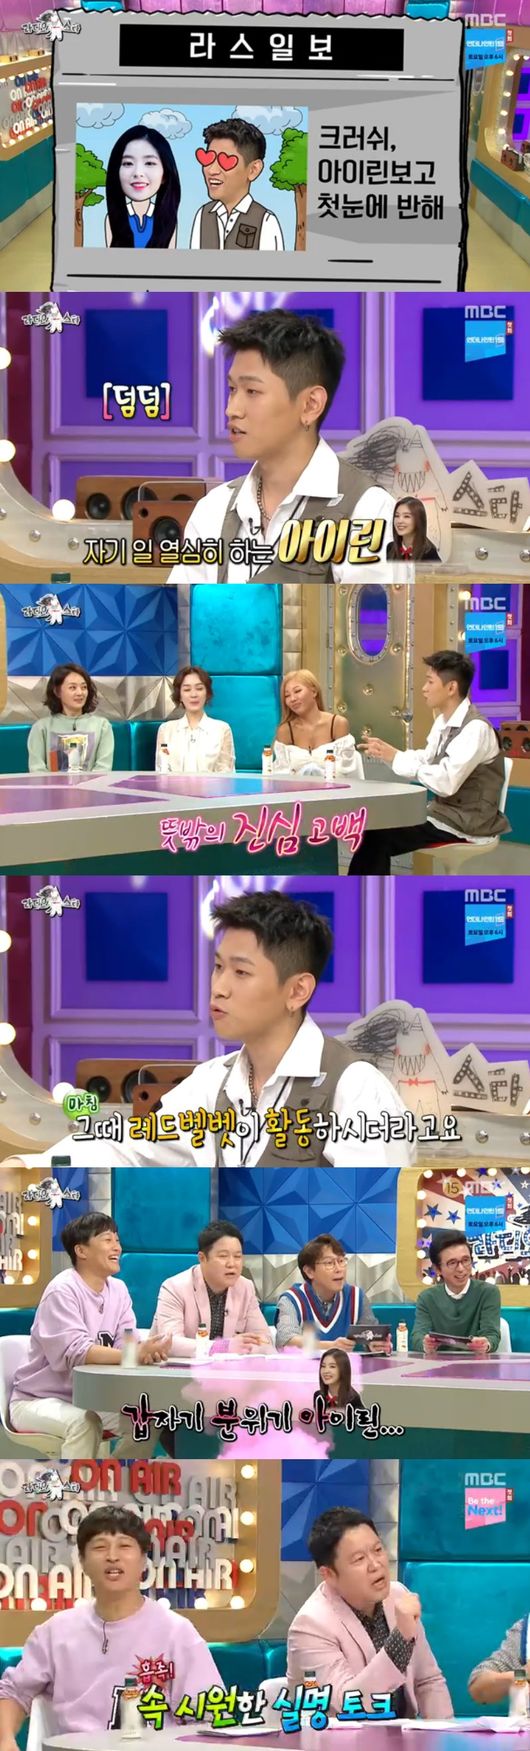 In the girls Jessie, Bae Jong-ok, and Kim Jung-nan, Crush did some cool-hearted sessions.Bae Jong-ok, Kim Jung-nan, Jessie and Crush appeared in MBC entertainment Radio Star broadcast on the 31st.On this day, MCs watched Bae Jong-ok and mentioned the historical travel with Jo In-sungs Buddhist monk, and Bae Jong-ok said, History travel was very good.Kim Jung-nan said in SHINee Fan that he was a BTS fan this time and poured tears because of Confessions, especially BTS.As it turned out, he was upset that he was injured during the political world tour.When I asked him to choose one of SHINee and BTS, Kim Jung-nan laughed with the fan club Ami force, saying BTS now.Jessie revealed an anecdote she had met in person with Ha Jung-woo, who had been in love with. She was the only guest to be invited to a razor event.I was embarrassed to throw the script and take a picture, Jessie said.Crush said that dreams were to appear on Radio Star, especially because he was to get a promise to appear on Radio Star, which was why he became a vocal director on MBCs new program.Crush said, My friends are all out, but I can not see my face, I can not talk.Bae Jong-ok and Kim Jung-nan comforted them, saying, My face is so cool as my voice.I started a full-fledged feature of GirlCrush.When Bae Jong-ok asked about GirlCrush history, Bae Jong-ok said that in many works, she played many roles that broke the frame of women and made strong self-assertion.When asked if he was actually not talking about himself, Bae Jong-ok said, I think that the words I thought are coming out without knowing it, I have been embarrassed. Kim Guura responded, The entertainment is right.Kim Jung-nan said, It is sharp and loud, he said, because of the perfectionist personality.However, he said that his passion for acting was burning and sometimes he was in a position to direct the director.Jessie said, It is better to say that it is cool than pretty.It is good to say that it is beautiful when you praise your habituality, especially when you are on stage, he said.Jessie then referred to the song Sen Sister and now asked to be called Strong Independent Woman (a strong, independent woman).Jessie said, I have a look, but I came up from the bottom and I got through it all by myself, and I said it like a boss. I can do everything I can to be honest, but Im referring to everything.Crush said, My name is only Crush, in fact, a timid person. I can not see the sound chart properly. Jessie, who was next to me, laughed, saying, I am laughing, I am always in the top spot.I also erased the sound source site app, said Crush. It was hard to bear the results of my work at first, but now it is better.Jessie said, Singers die if they do not work well, but they ask someone instead of seeing it.When MCs asked for a real ideal, Crush surprised everyone with a cool blind talk, saying that REDVelvet Irene is hard to do.Crush said, I have been told that I was really beautiful when I was in the REDVelvet activity in the past.Radio Star broadcast screen capture